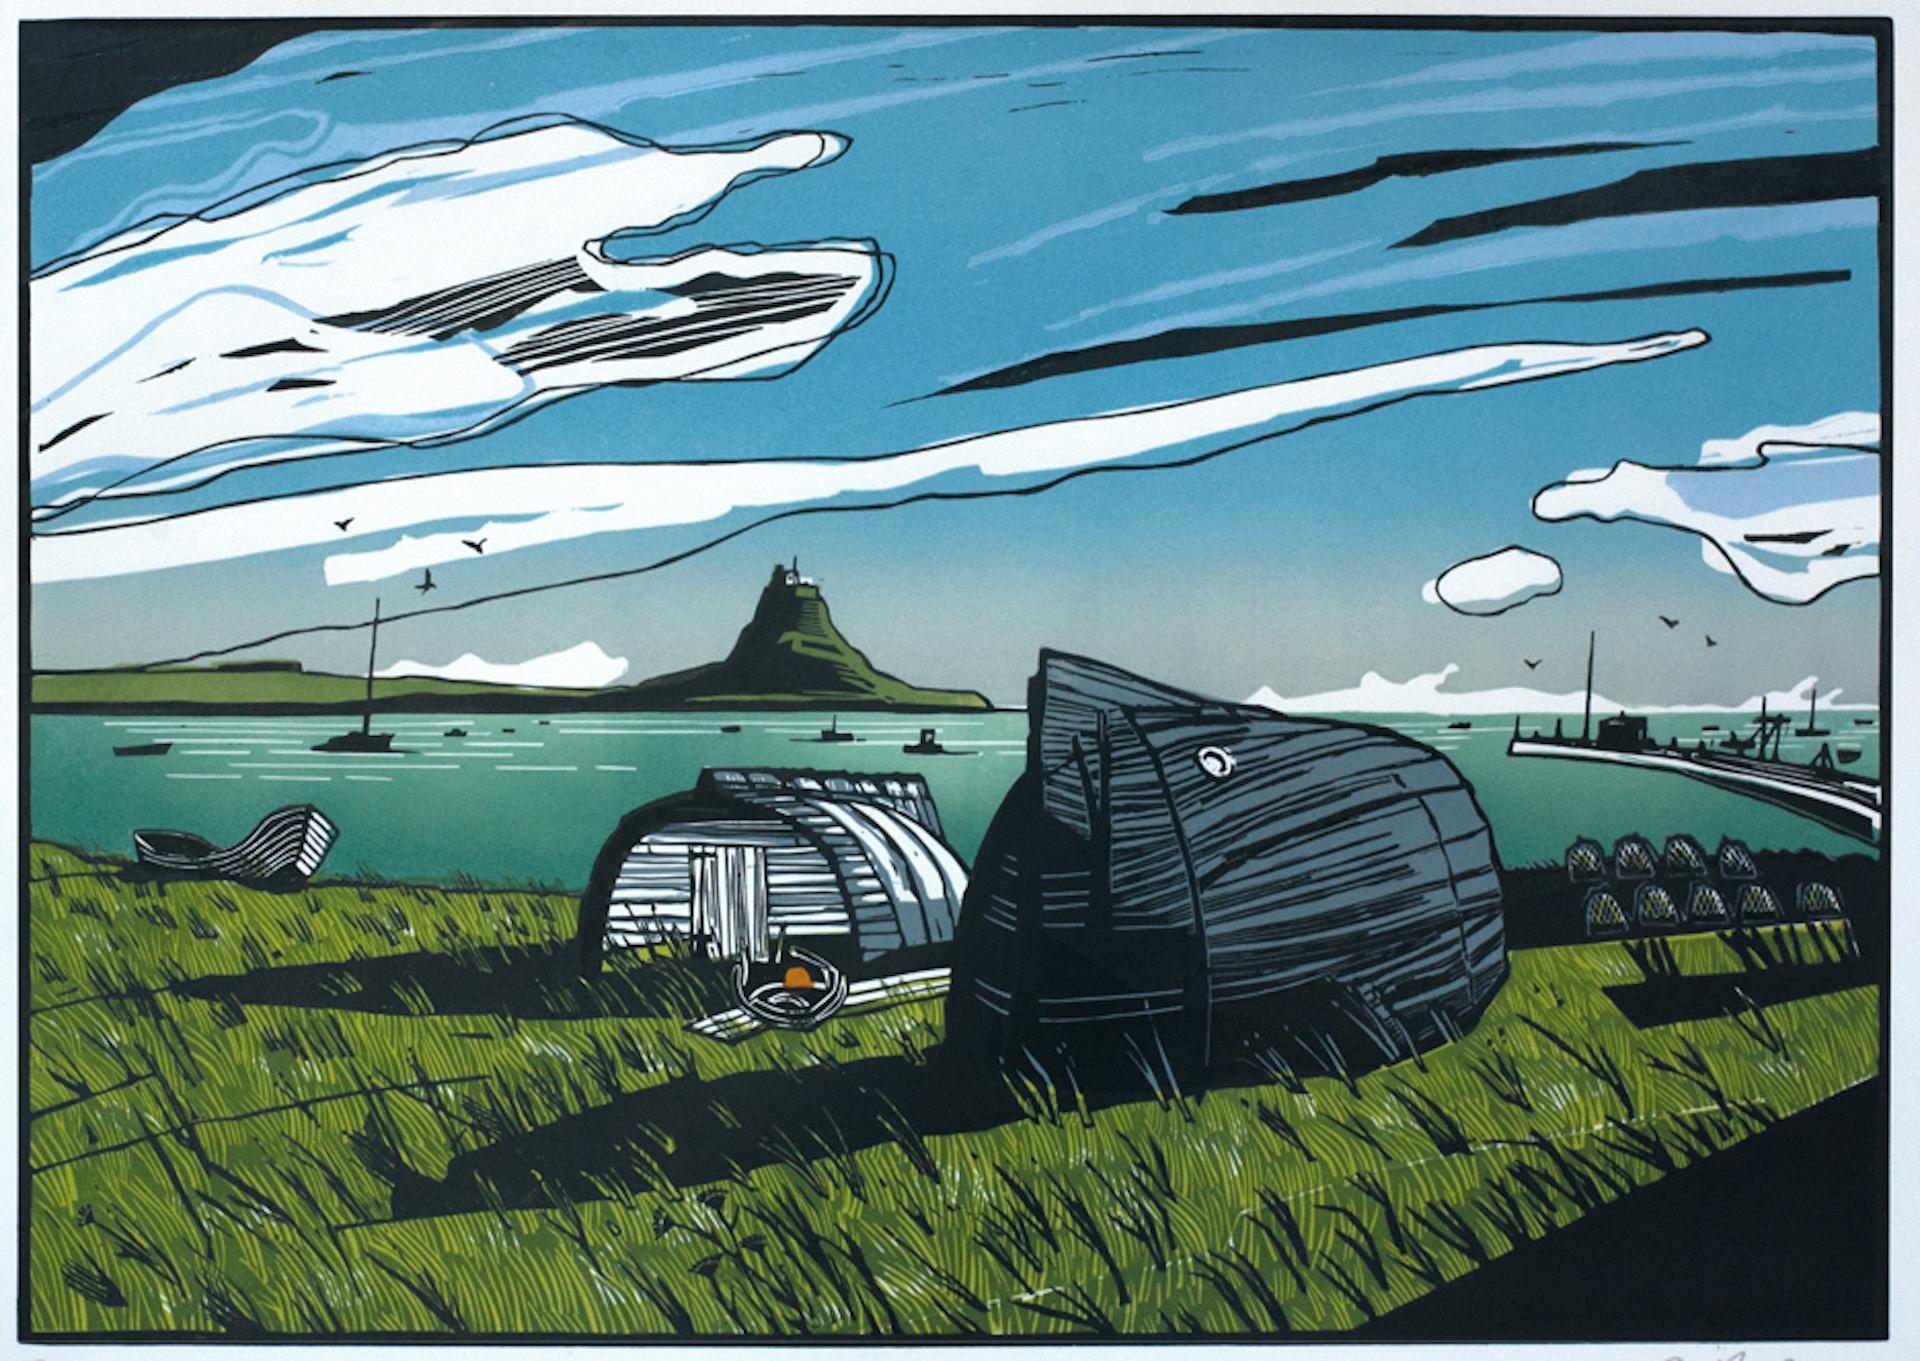 'Lindisfarne' is a limited edition three block colour lino print by Colin Moore.A three block colour lino print by Colin Moore in a limited edition of 100, featuring the Holy Island of Lindisfarne on the Northumbrian coast
Colin Moore printmaker and